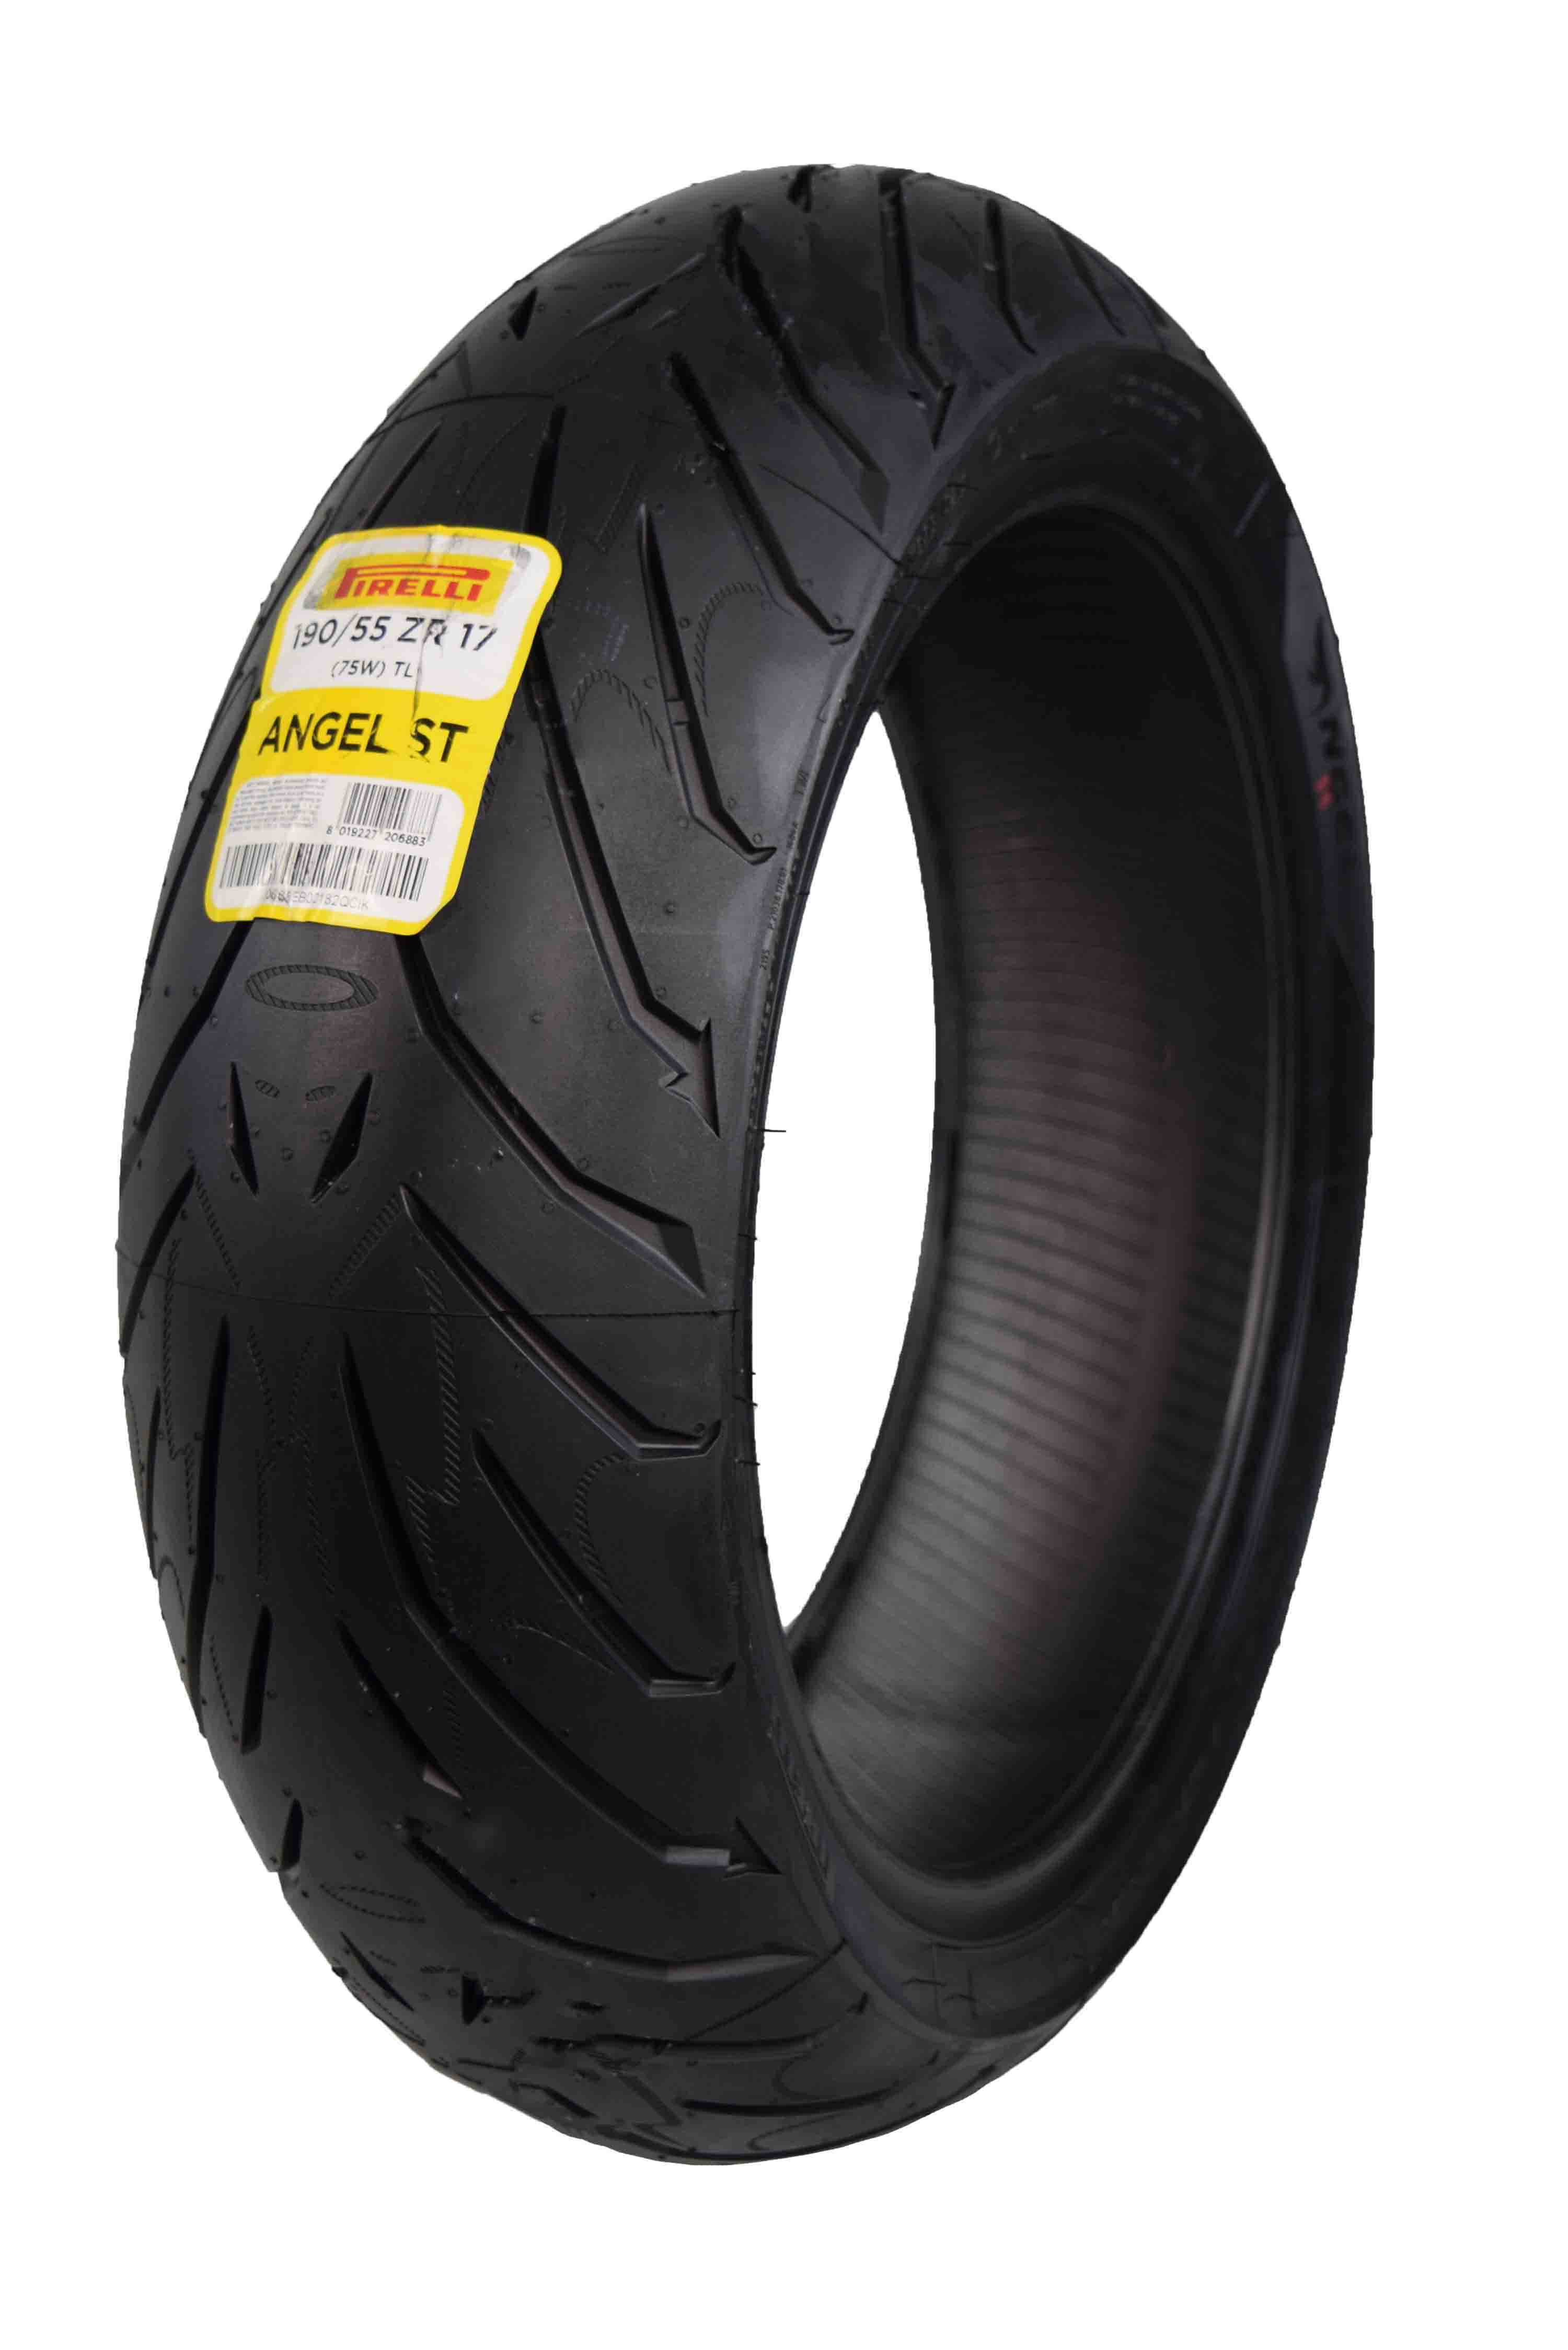 Pirelli Angel GT Sport Touring Motorcycle/Bike All-Weather Riding Tyre 